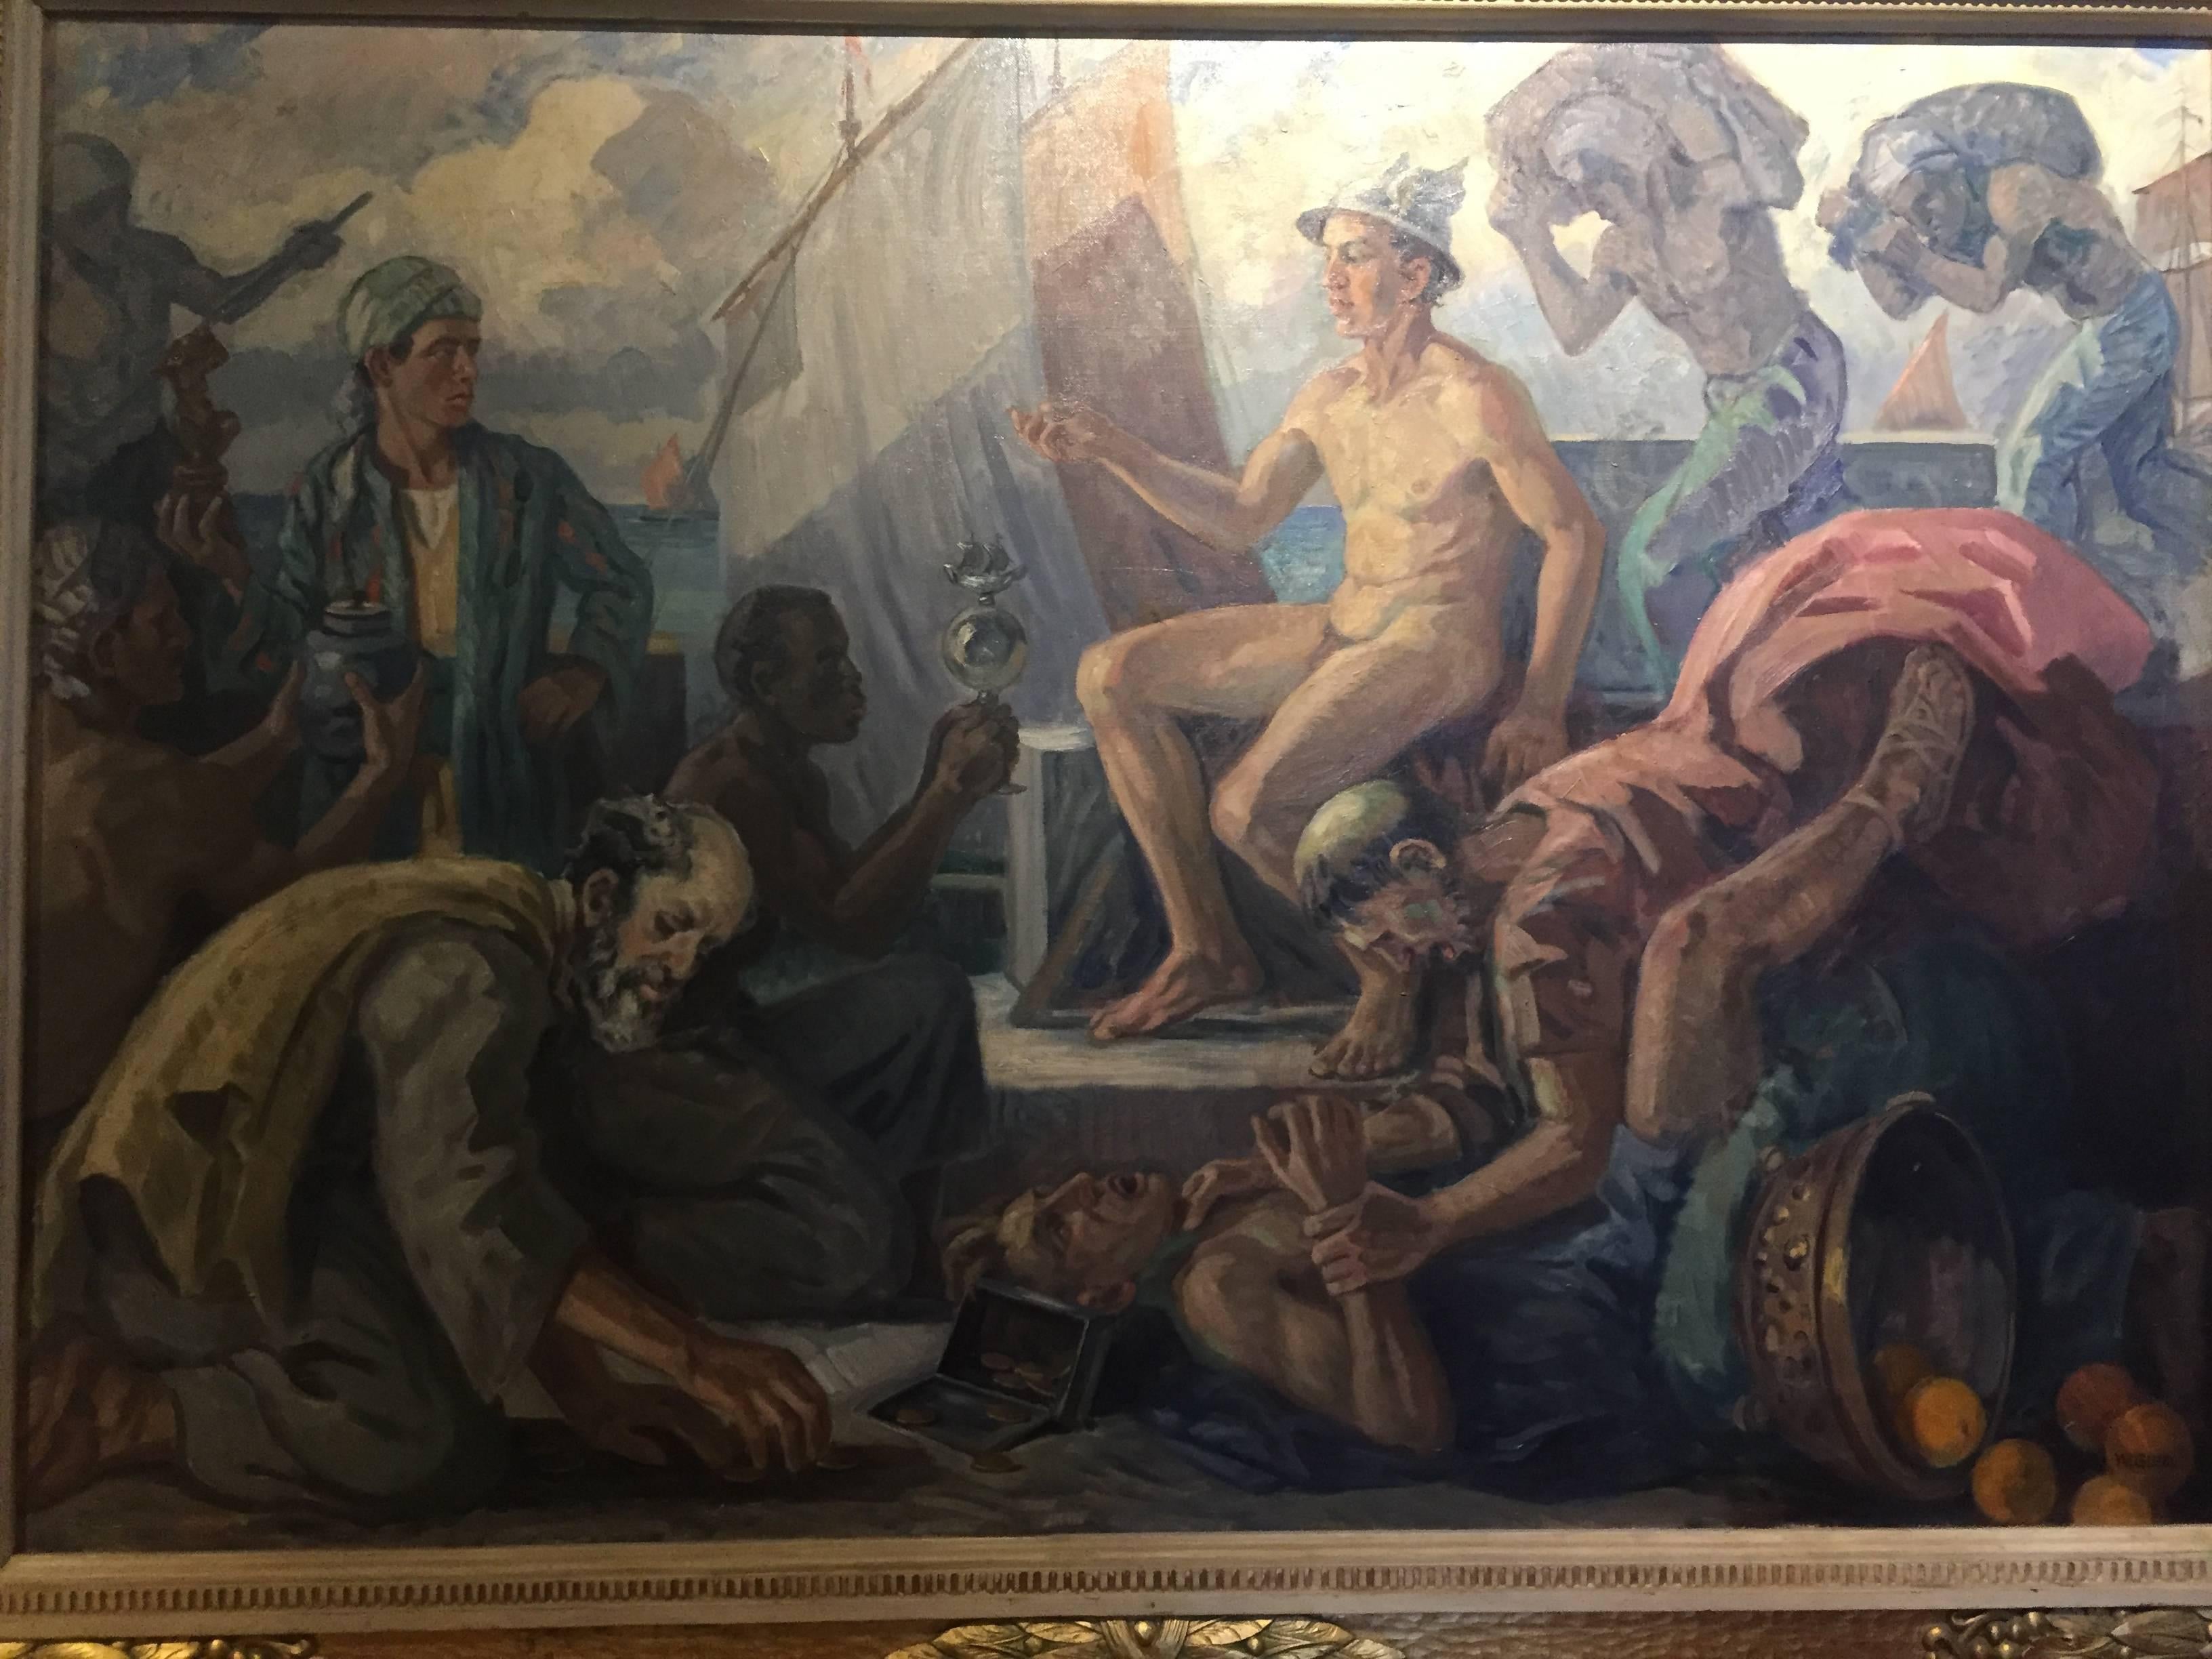 Exceptional size enhances the striking composition by Danish artist Alfred Glud (likely painted circa 1910) of the Olympic Greek god Hermes, the emissary and messenger of the gods and the patron of herdsmen, thieves, graves, and heralds. The scene